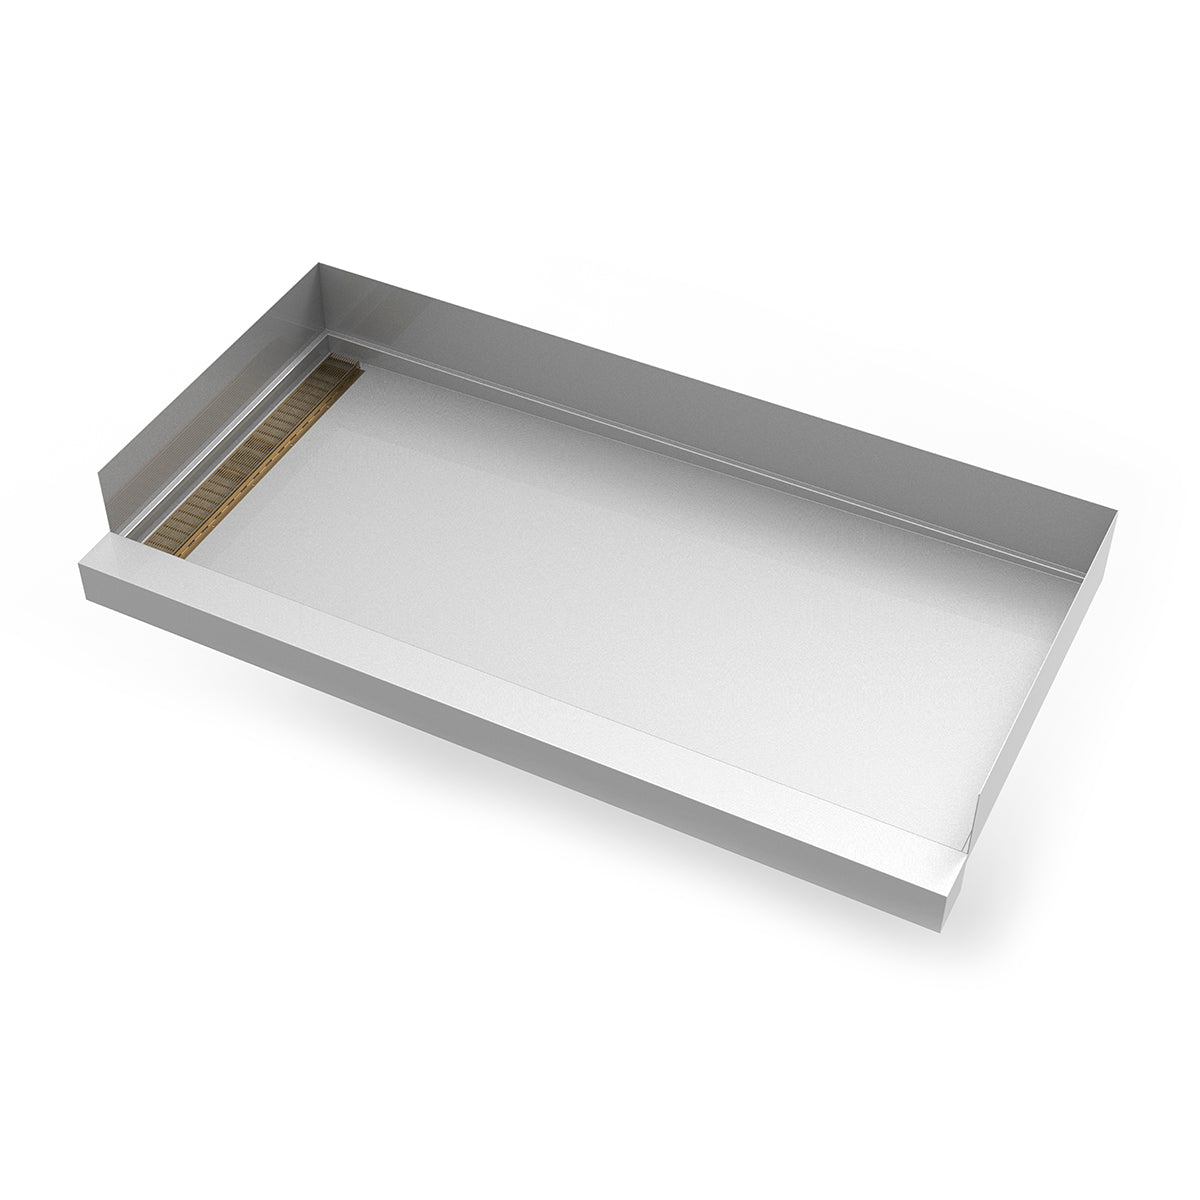 Infinity Drain 30"x 60" Stainless Steel Shower Base with Left Wall Wedge Wire Linear Drain location